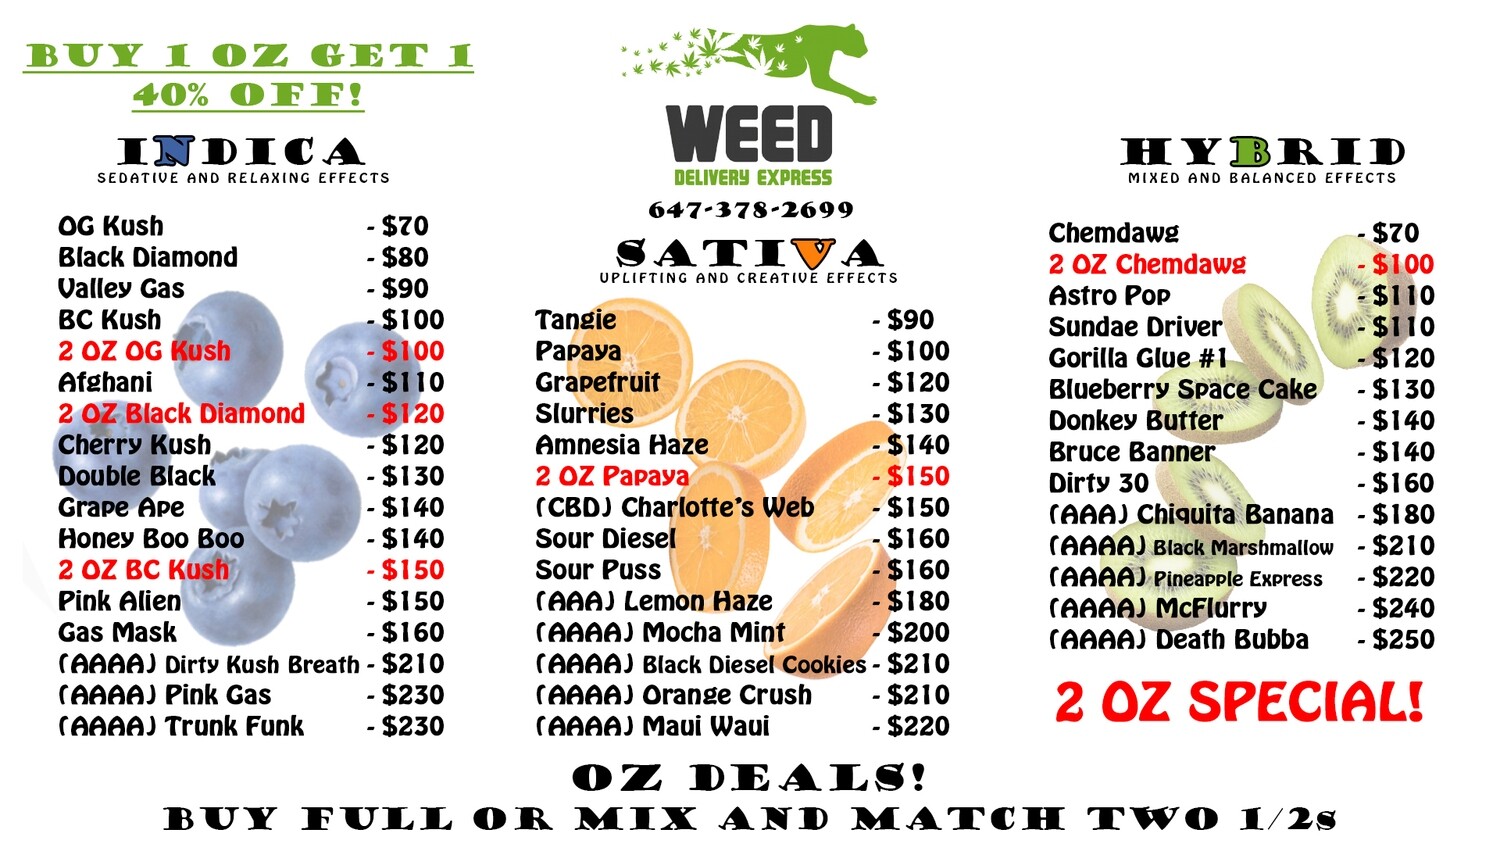 2 OZs DEAL. BUY 1 GET 1 at 40% OFF! ADD 2 TO CART!